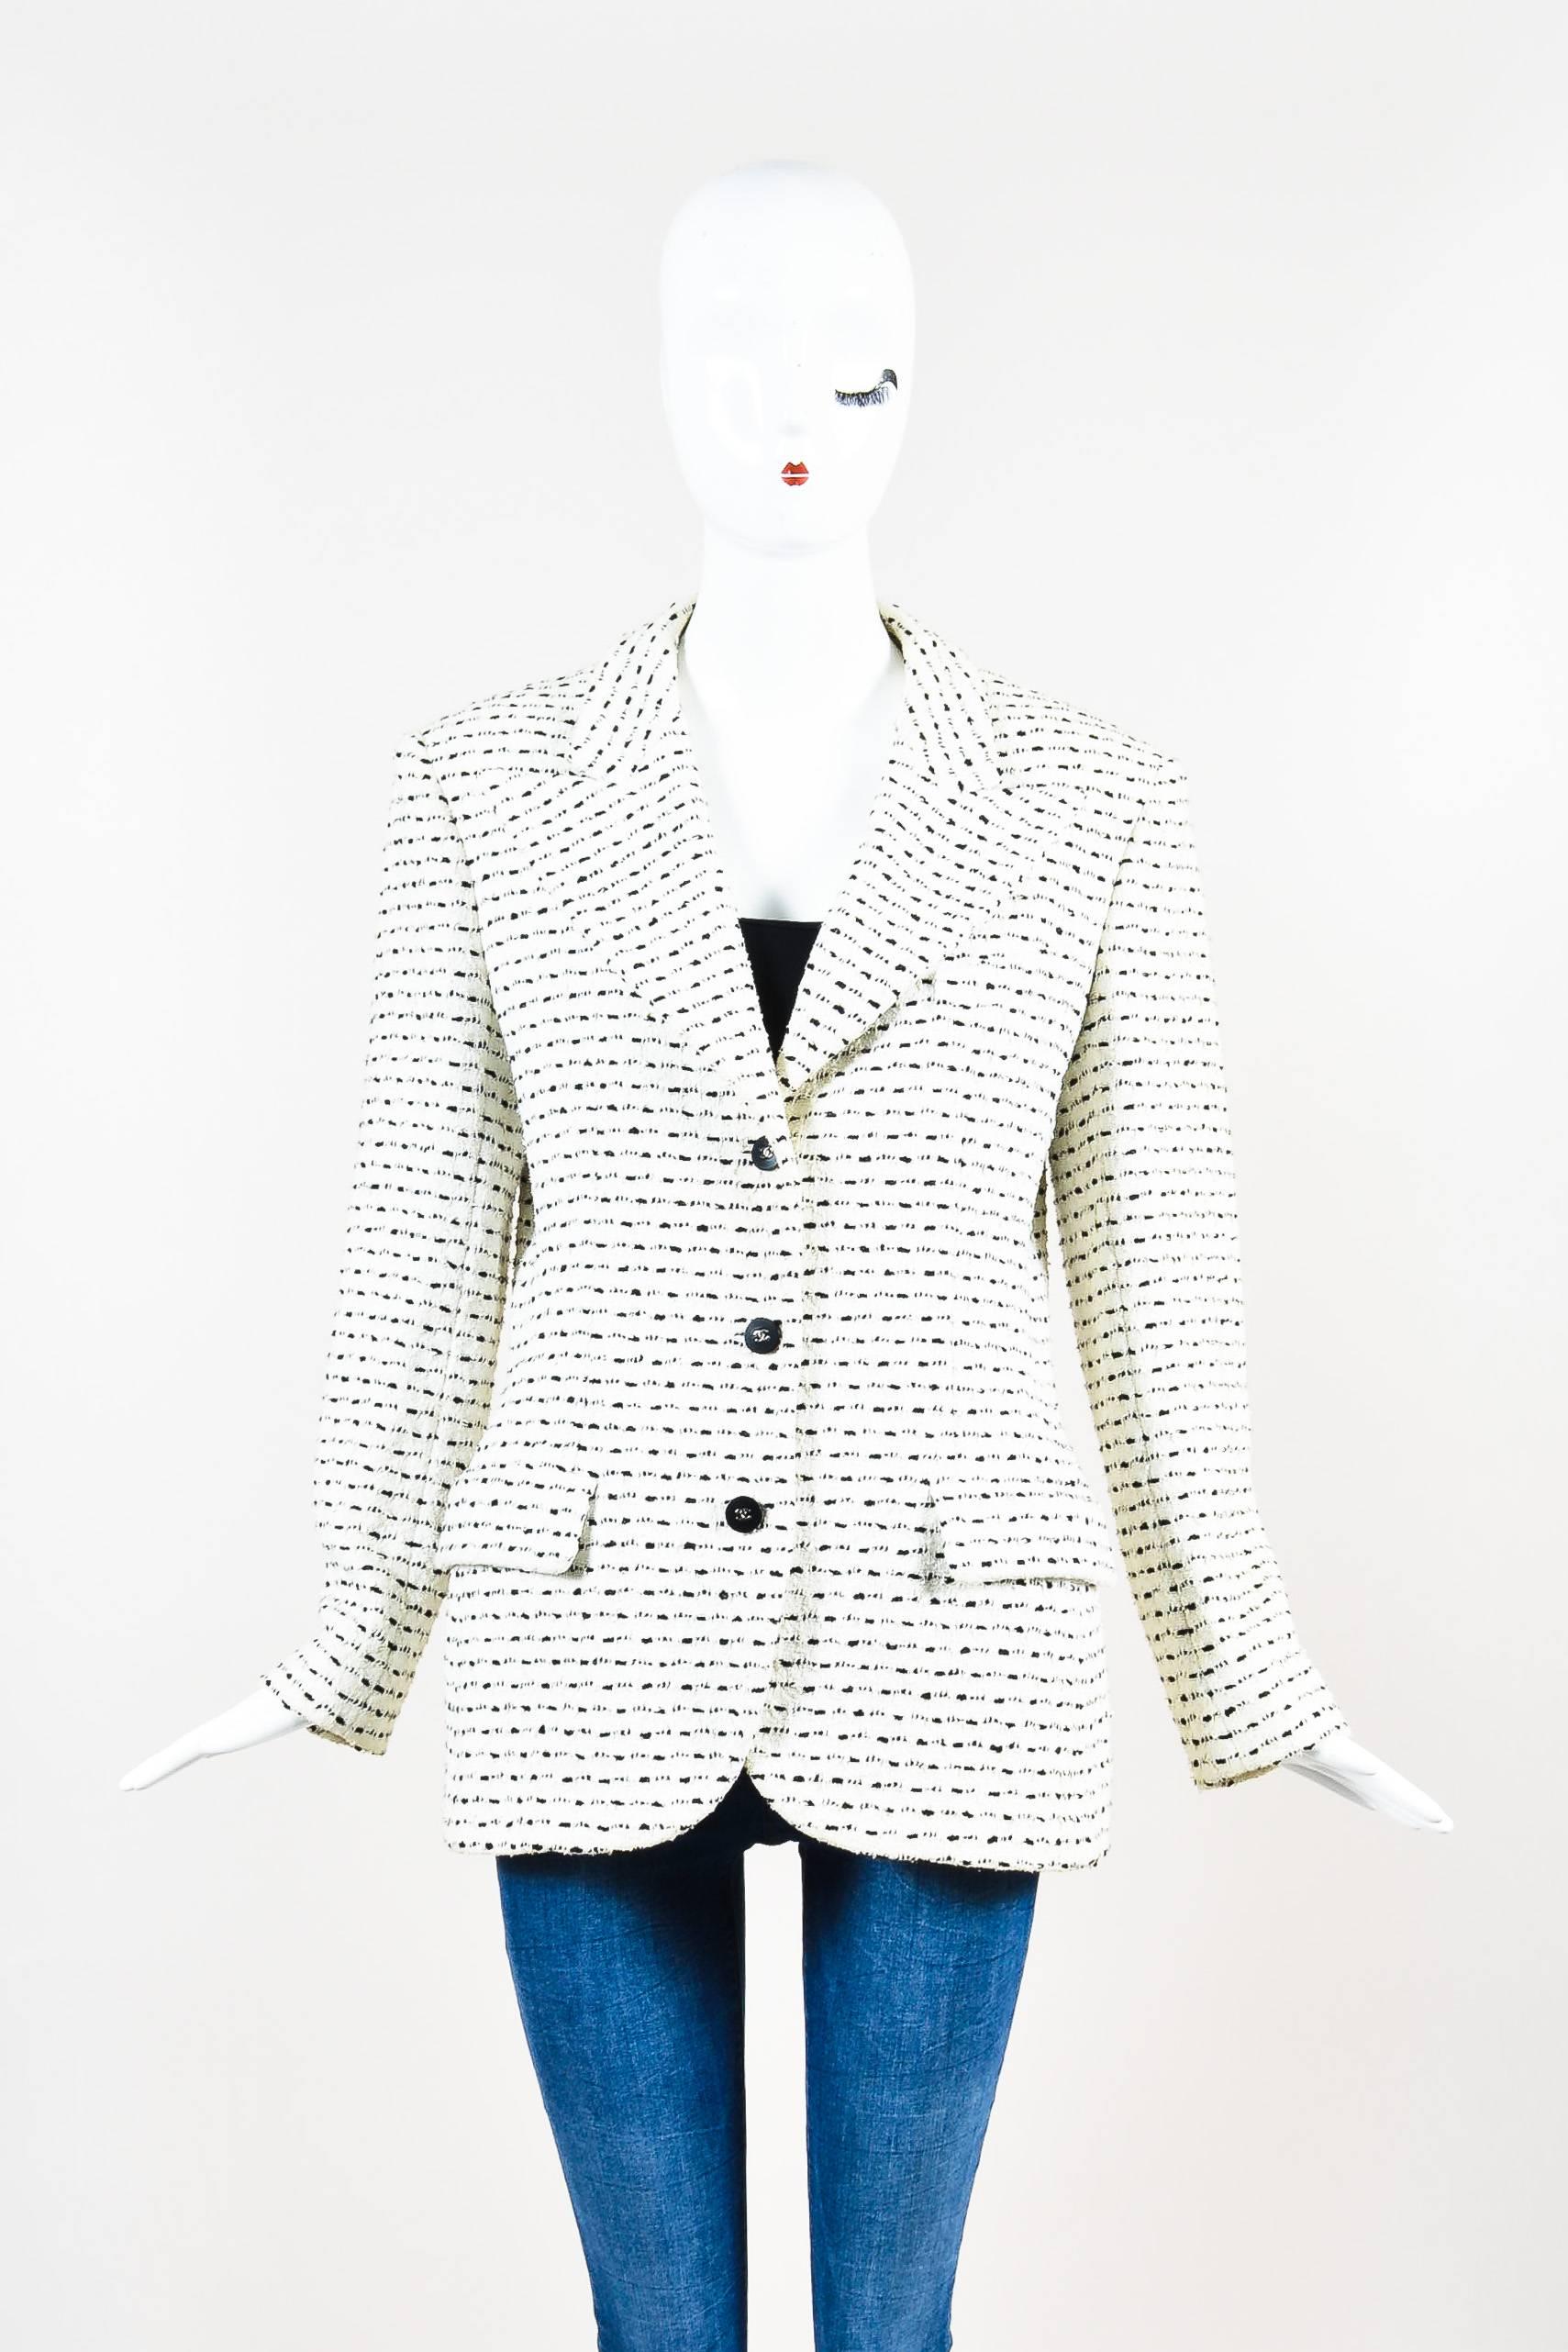 Chic jacket featuring a long silhouette, 'CC' buttons at the front and sleeve plackets, structured shoulders, front flap pockets, and a peak lapel. Single breast pocket. Silvery metallic chain trim at underside of hem. Textured knit construction.